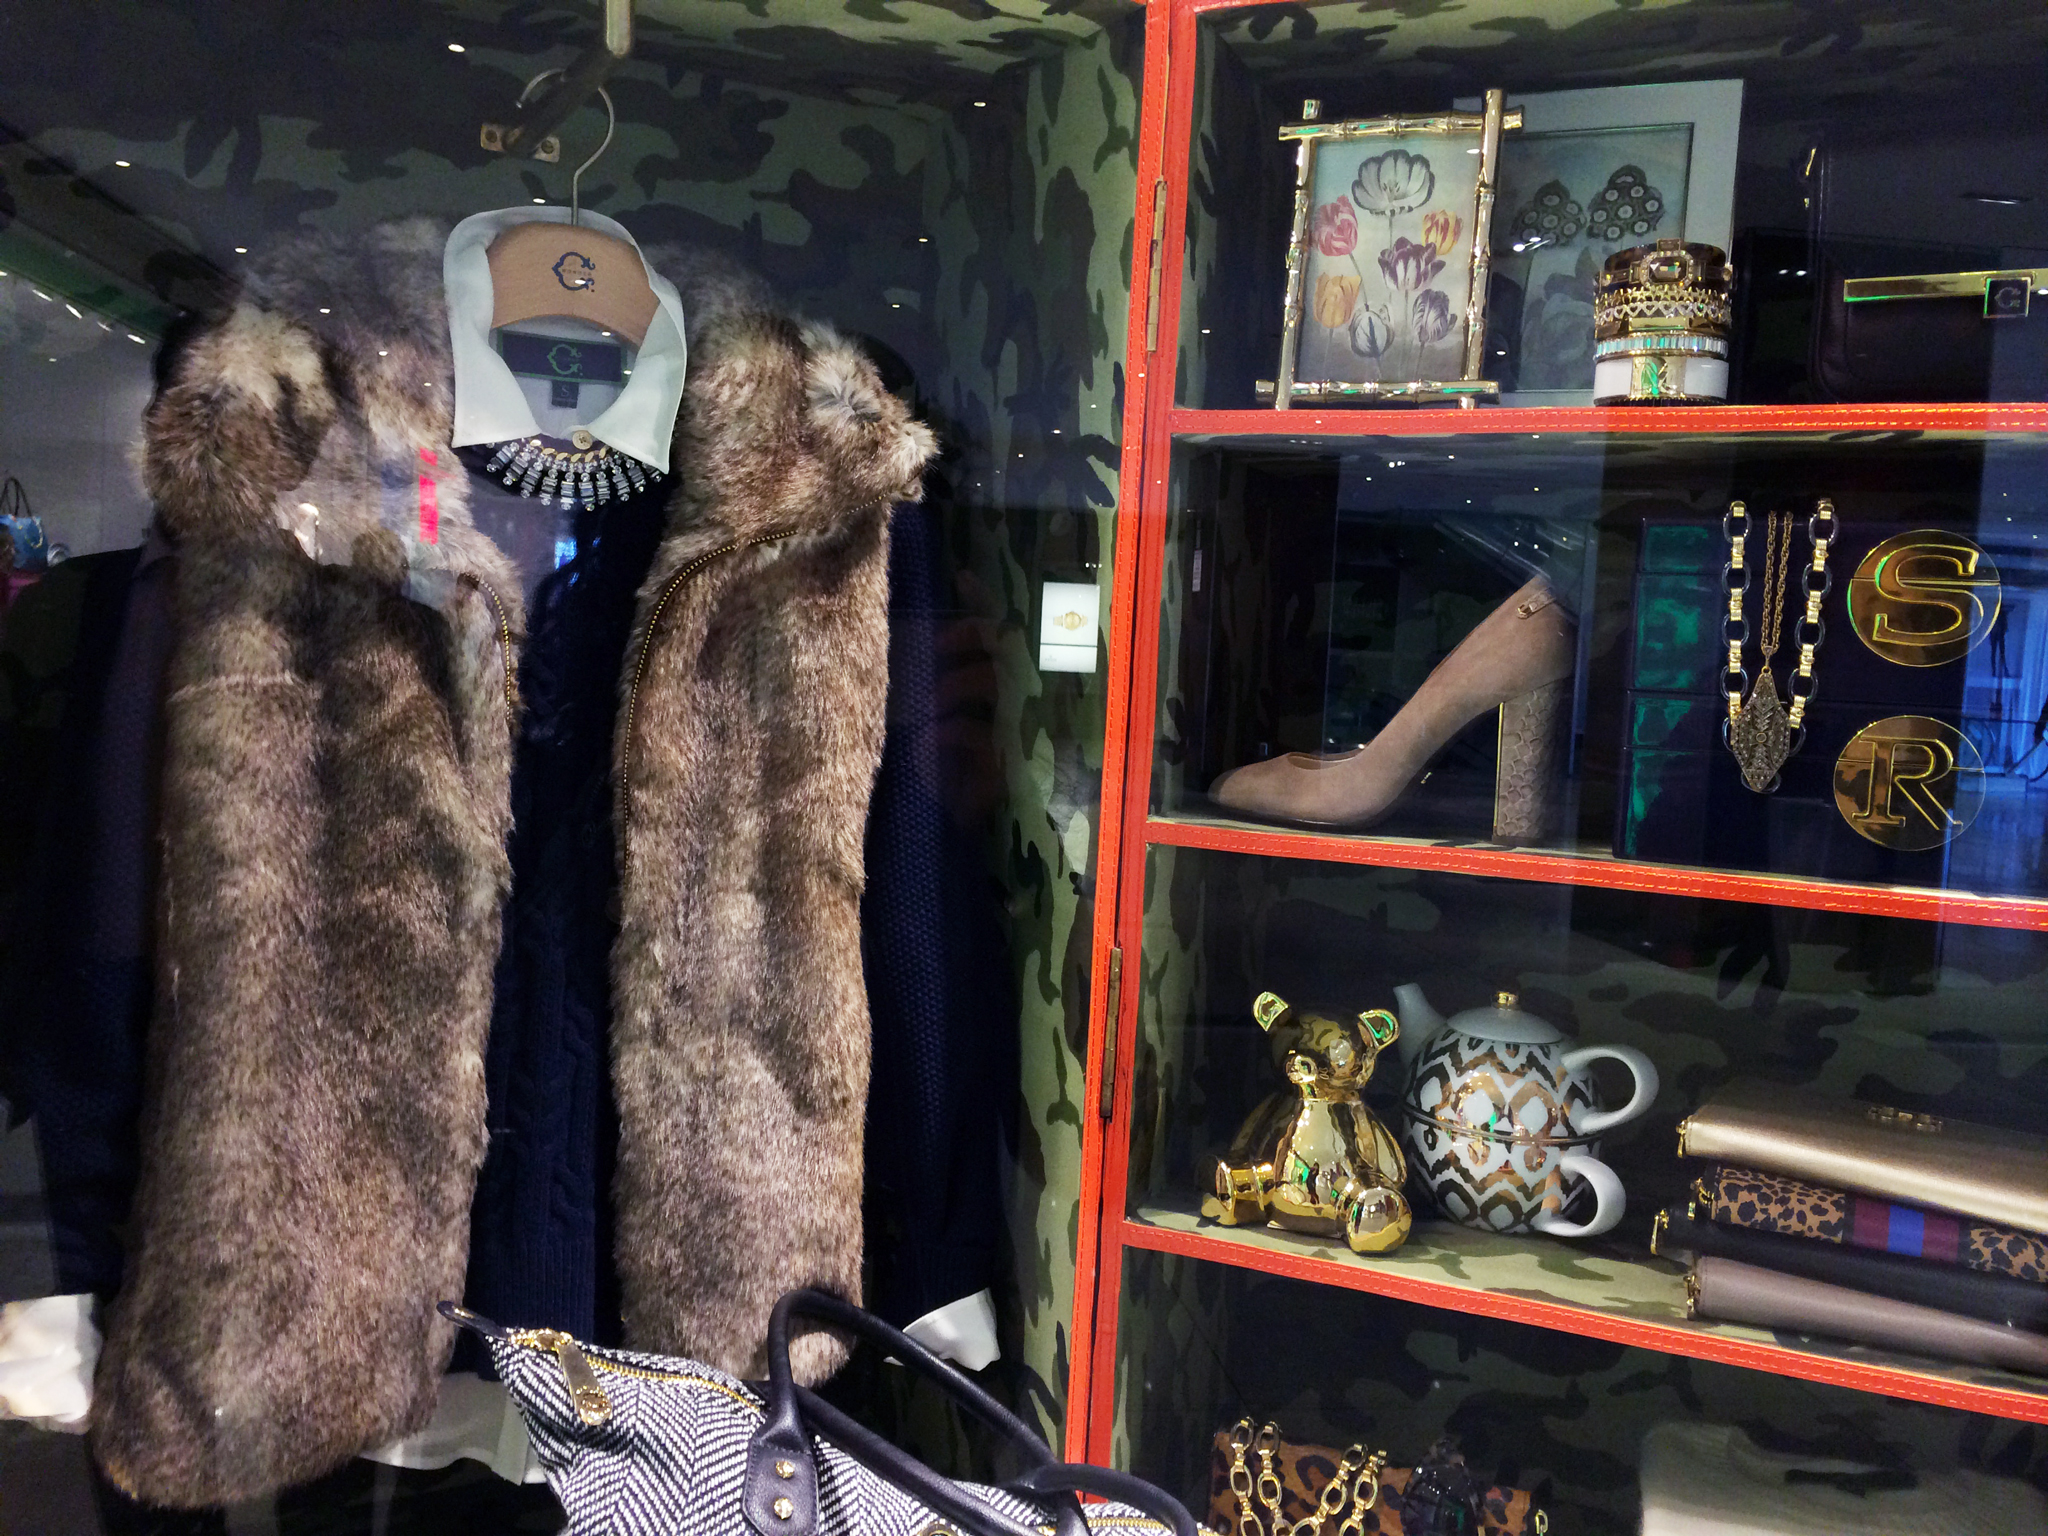 Fashion and accessory display at C. Wonder in New York. Photo by alphacityguides.